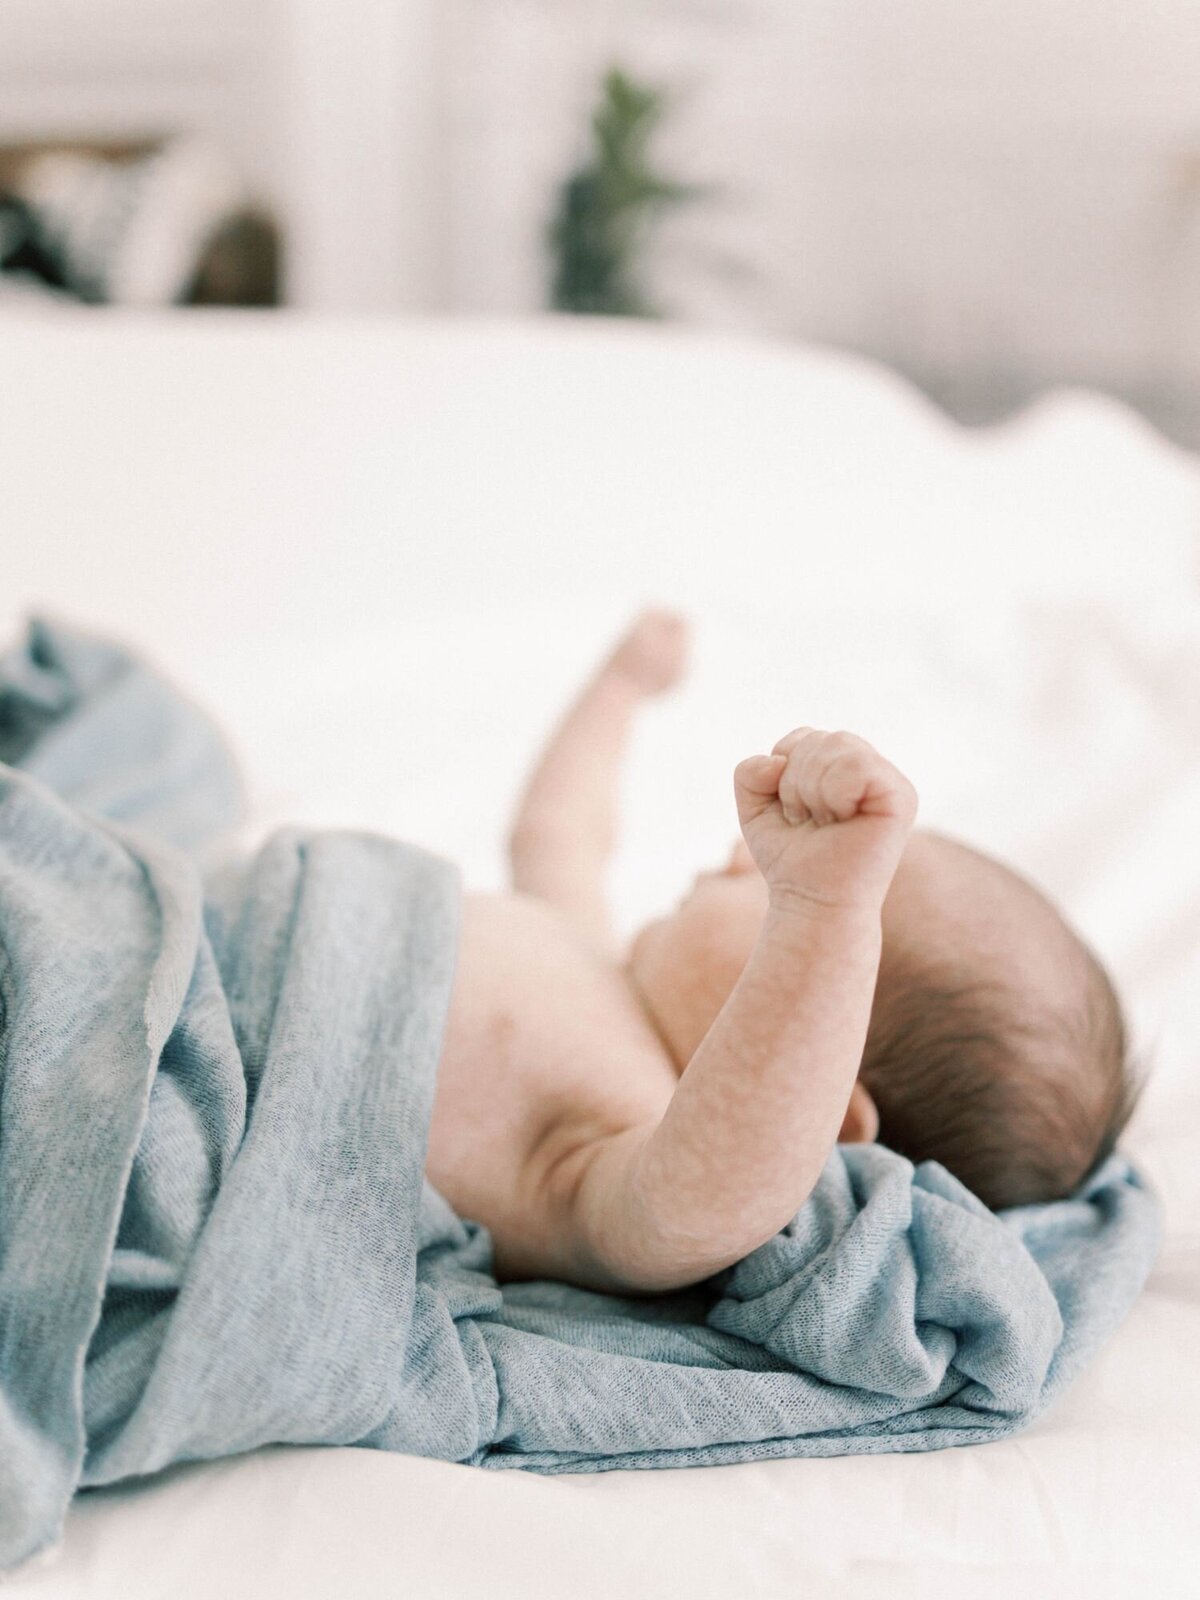 Baby is wrapped in blue blanket on white sheets holding arms up in the air.